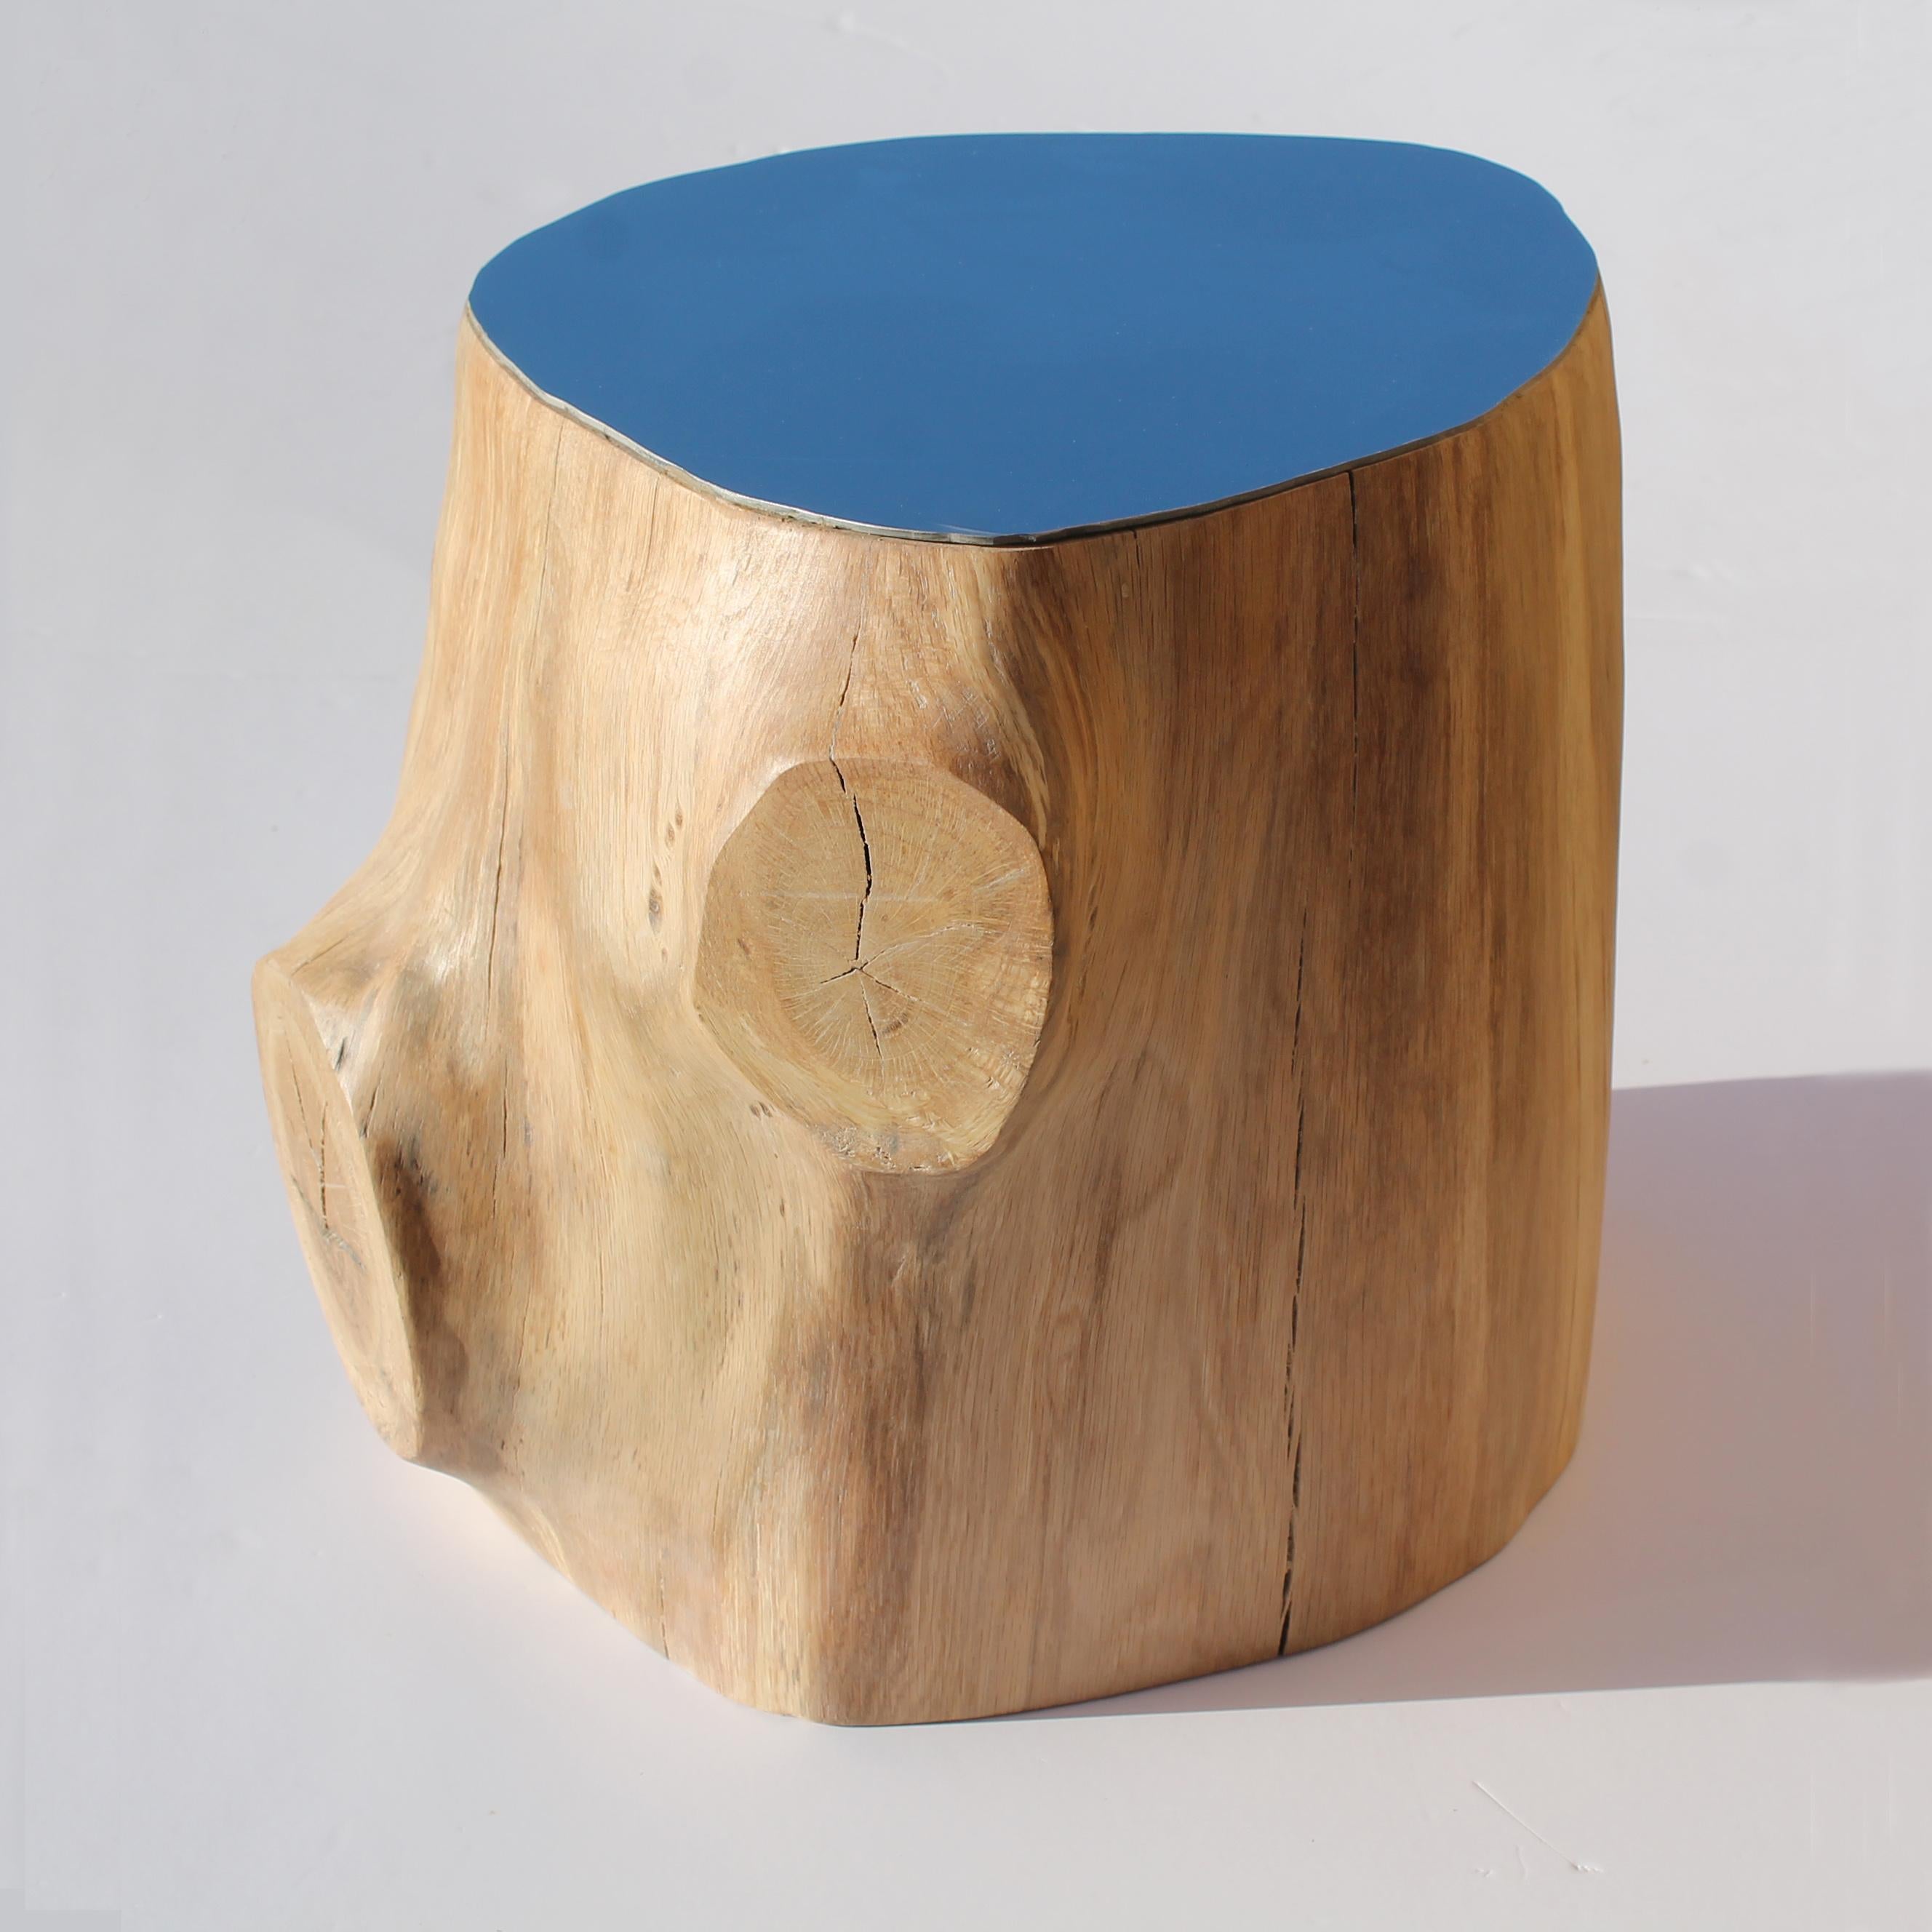 These sculptural floor pieces can be shown in small groups or individually.  Crafted from sustainably felled English Oak from the Titsey Estate in Surrey and polished stainless steel. The oak is finished with a hard wax oil and has been warm air